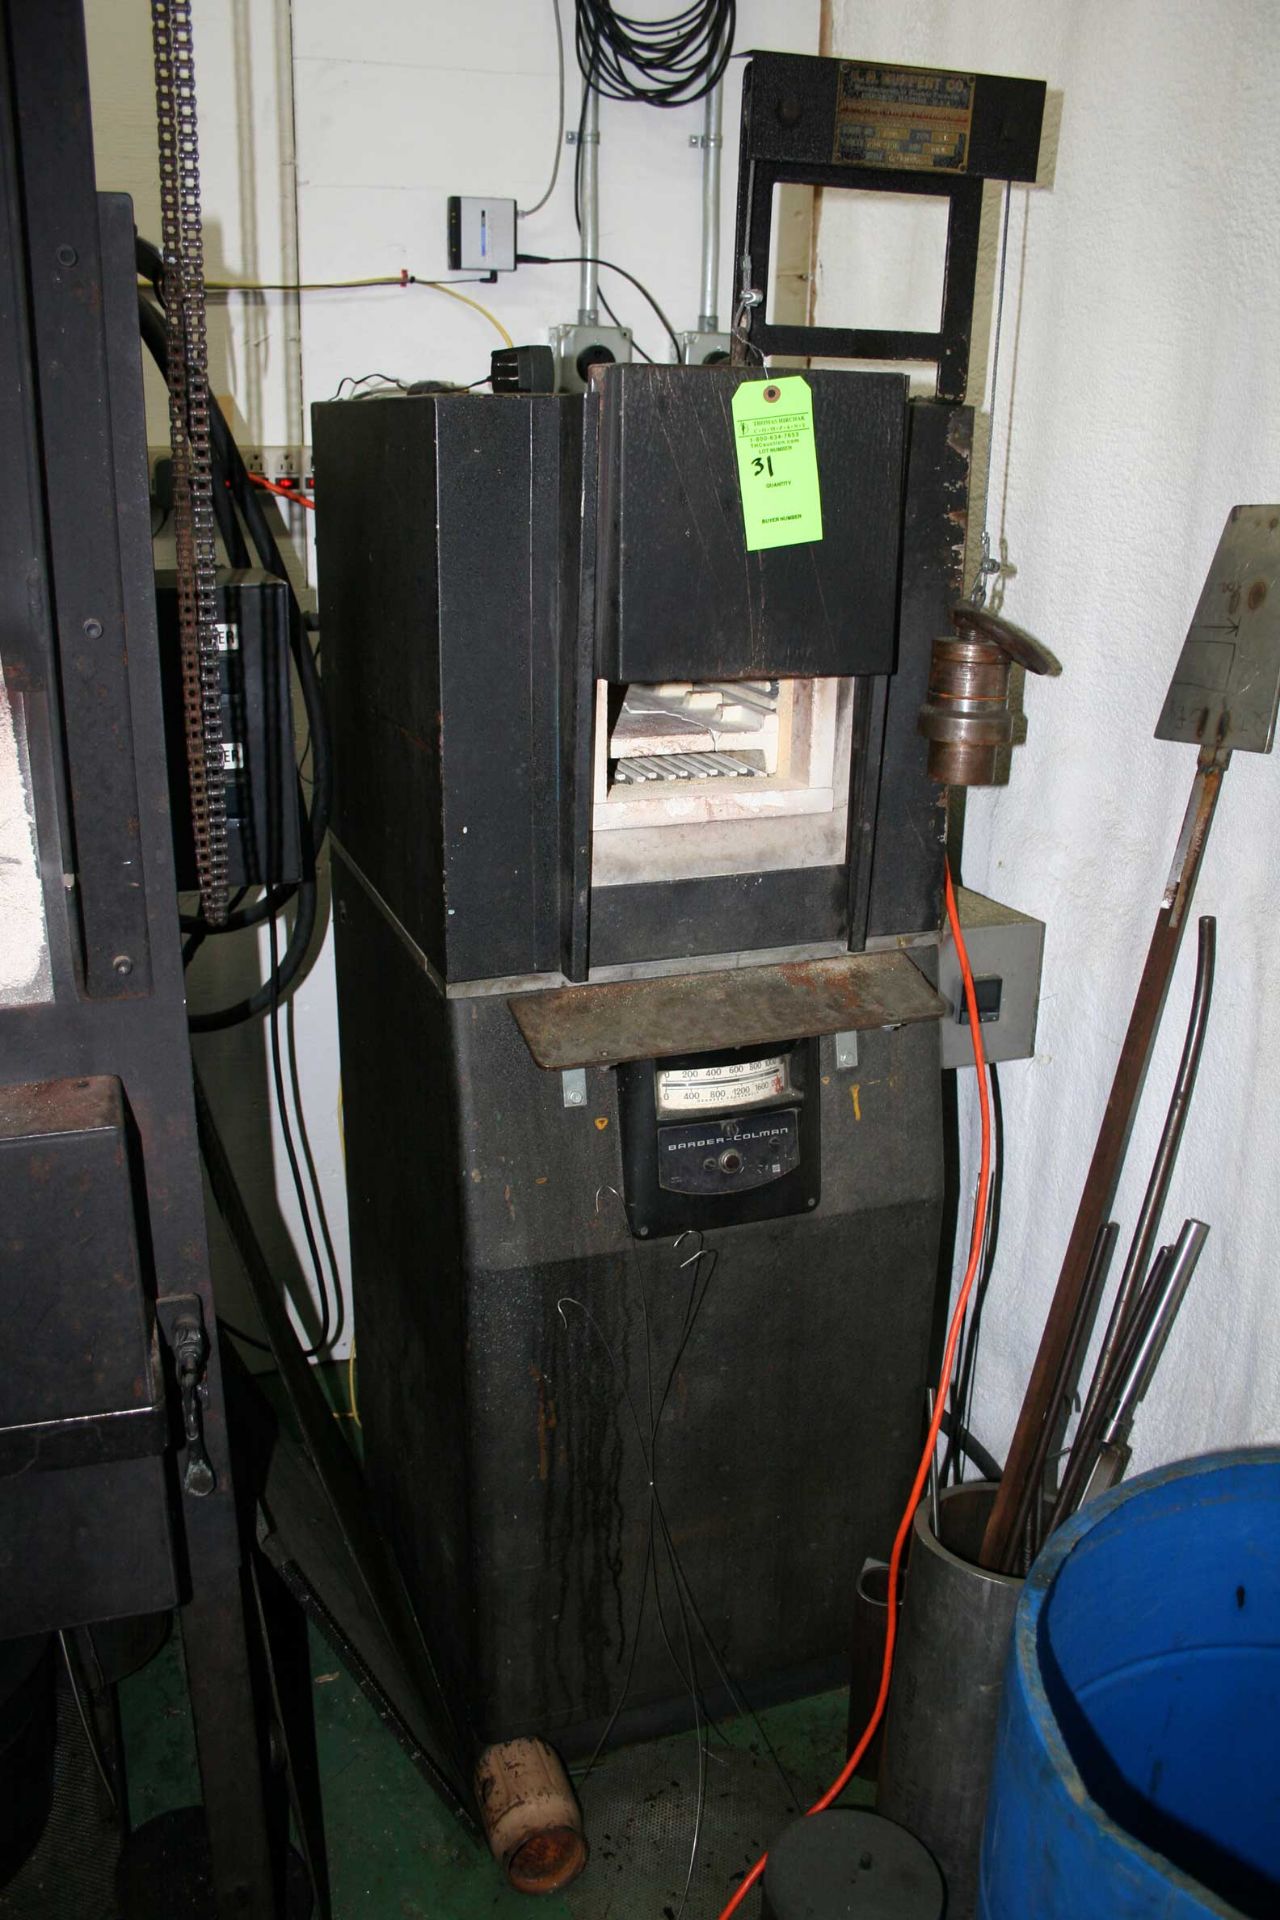 KH Huppert Furnace 220v; 1ph; 8x8x15 chamber replaced old analog control with new OmegaÿControls